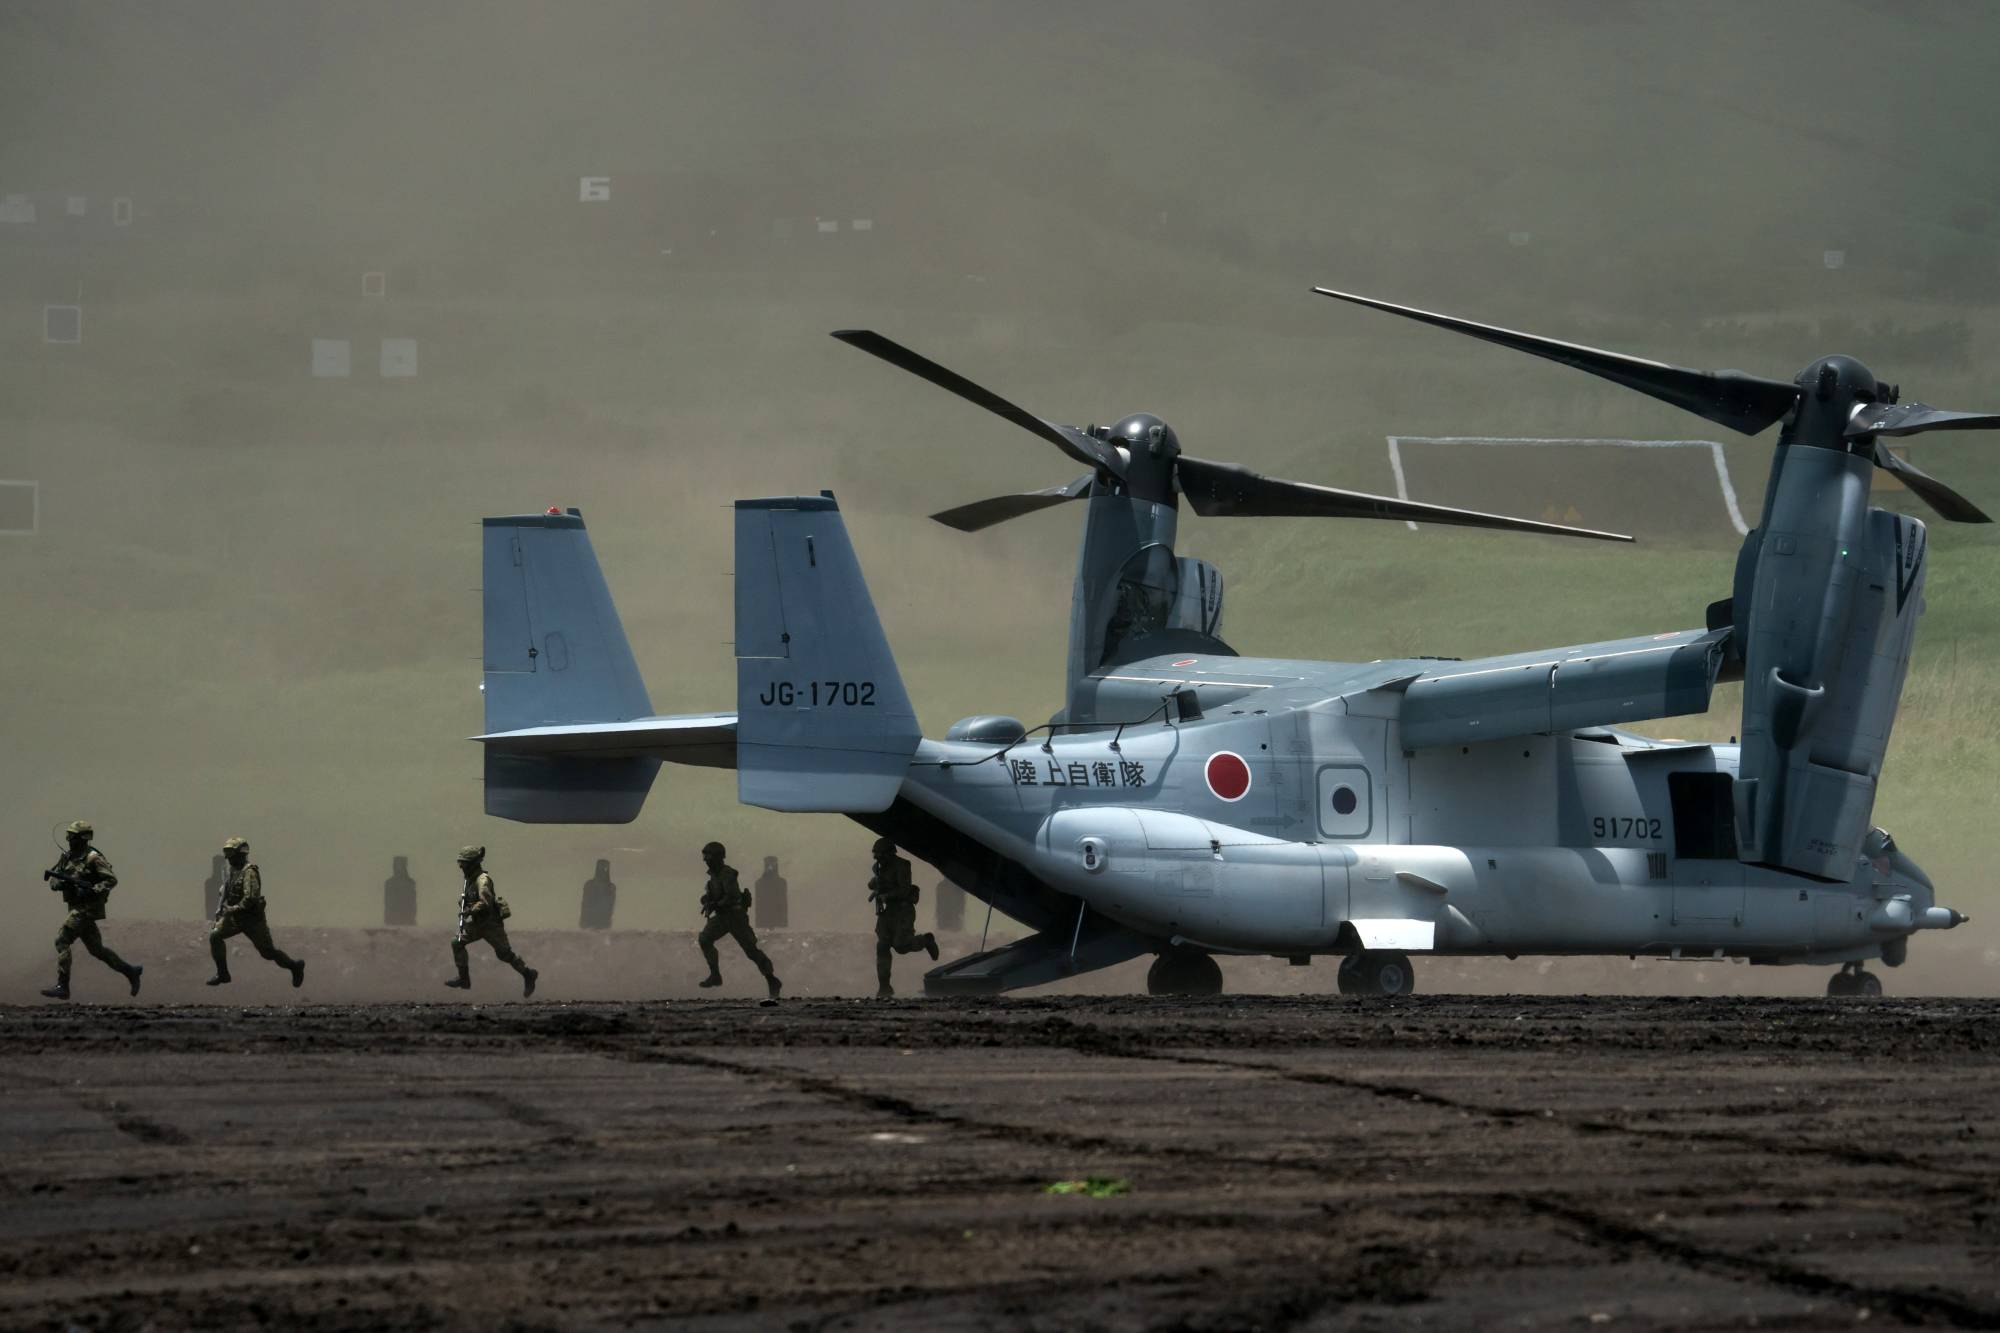 Ground Self-Defense Force members disembark from a V-22 Osprey aircraft during annual live-fire exercise at the East Fuji Maneuver Area, in Gotemba, Shizuoka Prefecture, in May. | POOL / VIA REUTERS